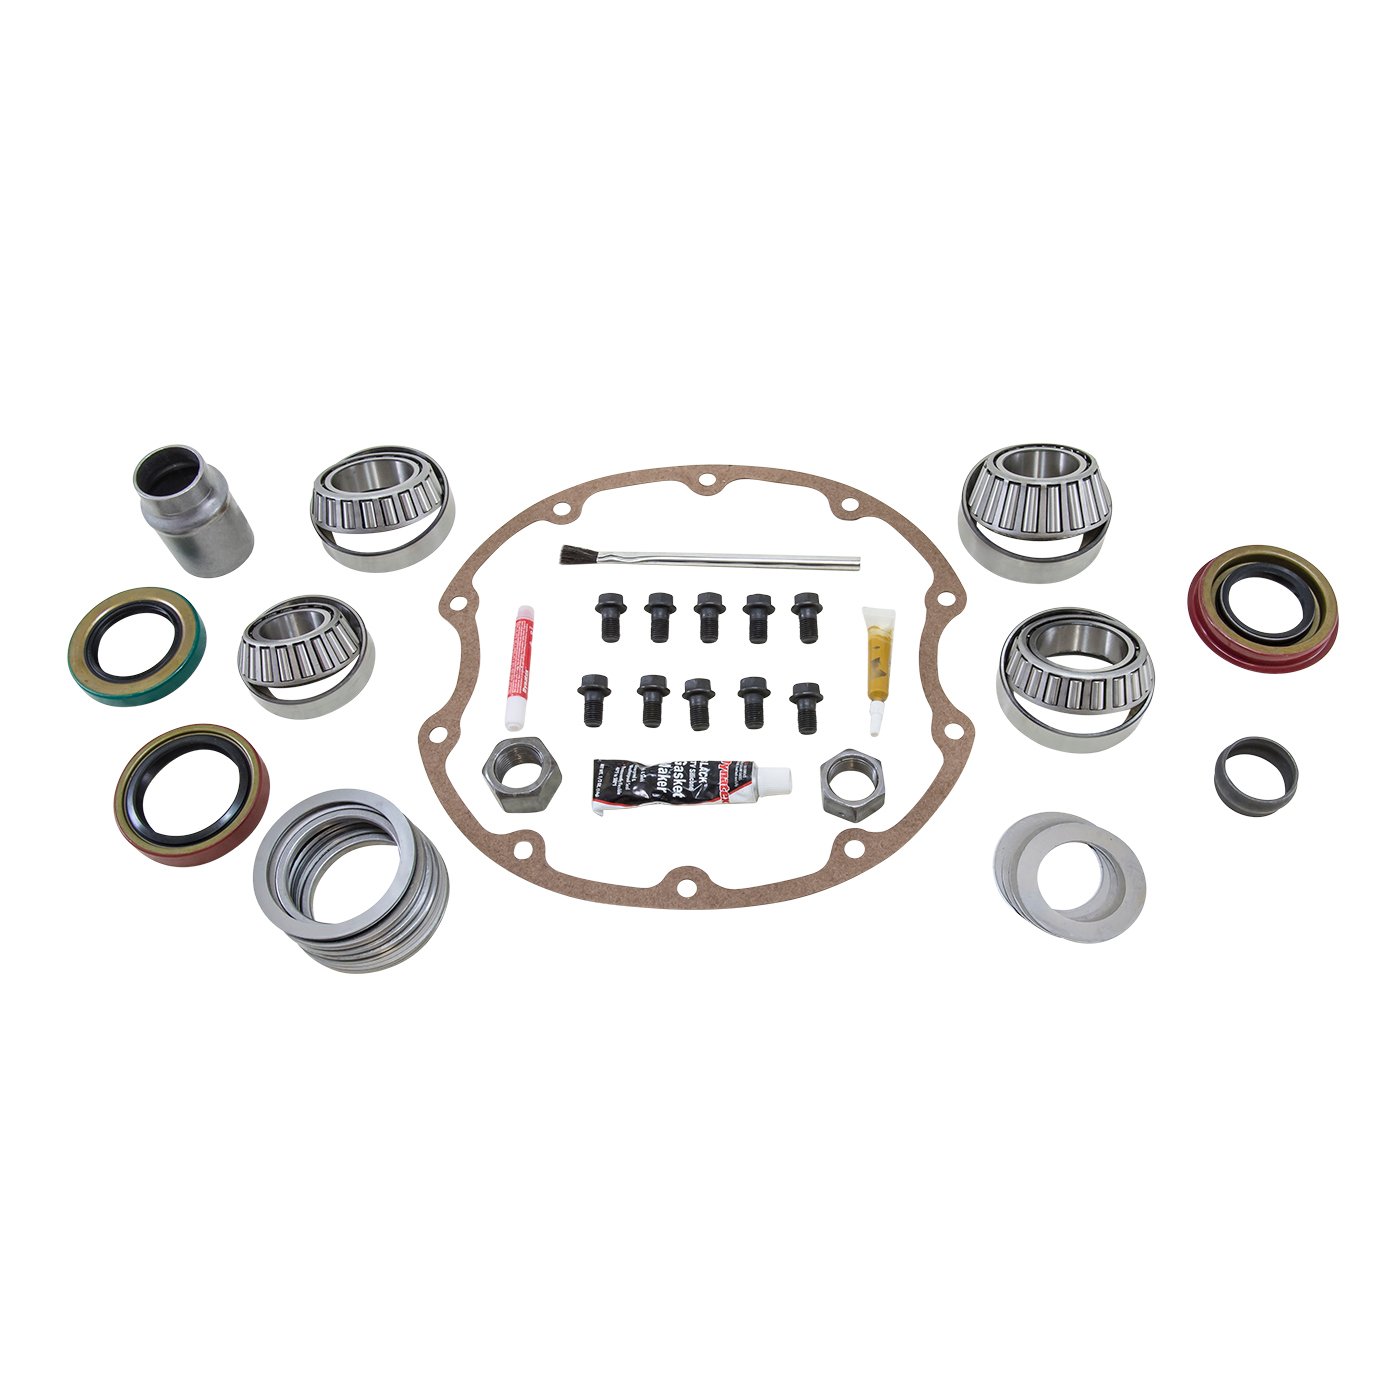 Master Overhaul Kit for Buick/Oldsmobile/Pontiac 8.2 in. Differential